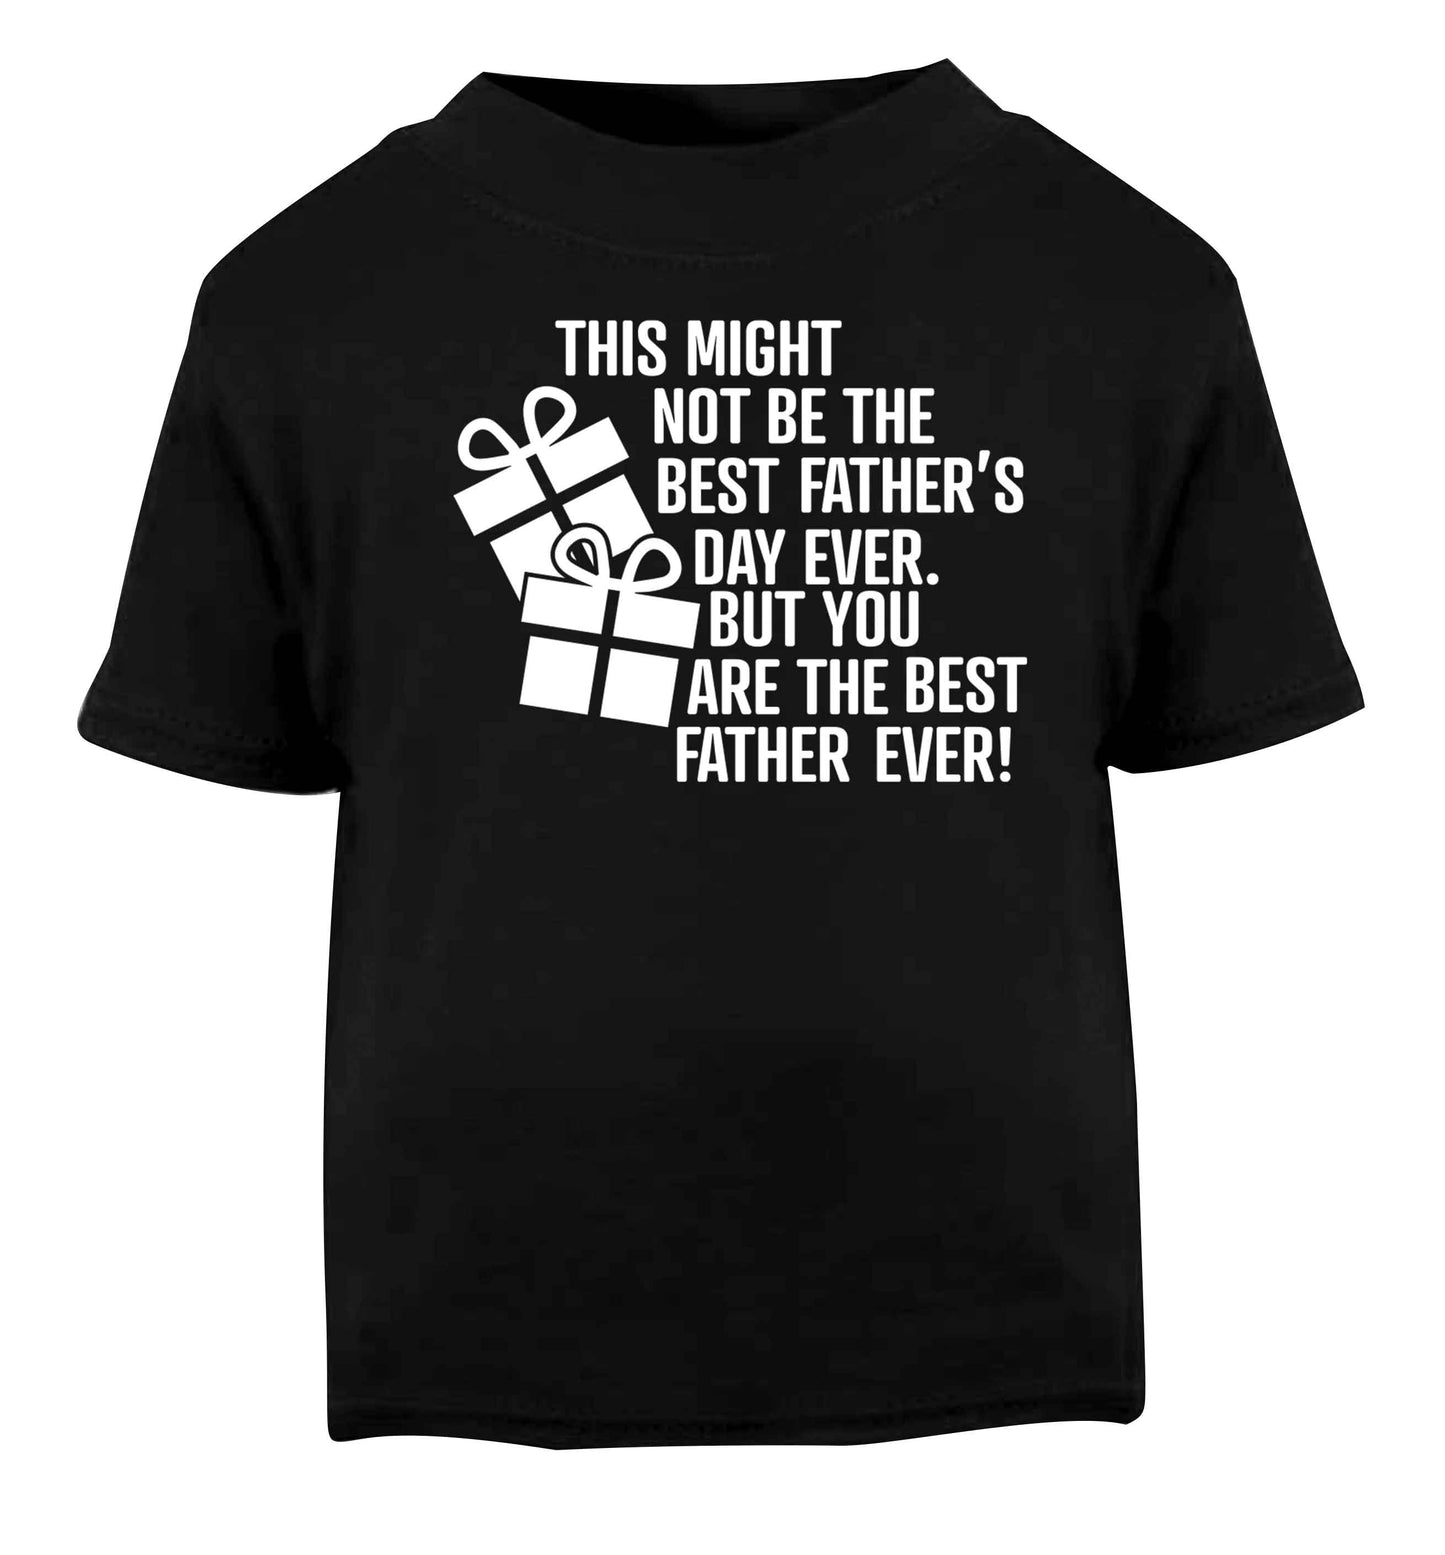 It might not be the best Father's Day ever but you are the best father ever! Black baby toddler Tshirt 2 years